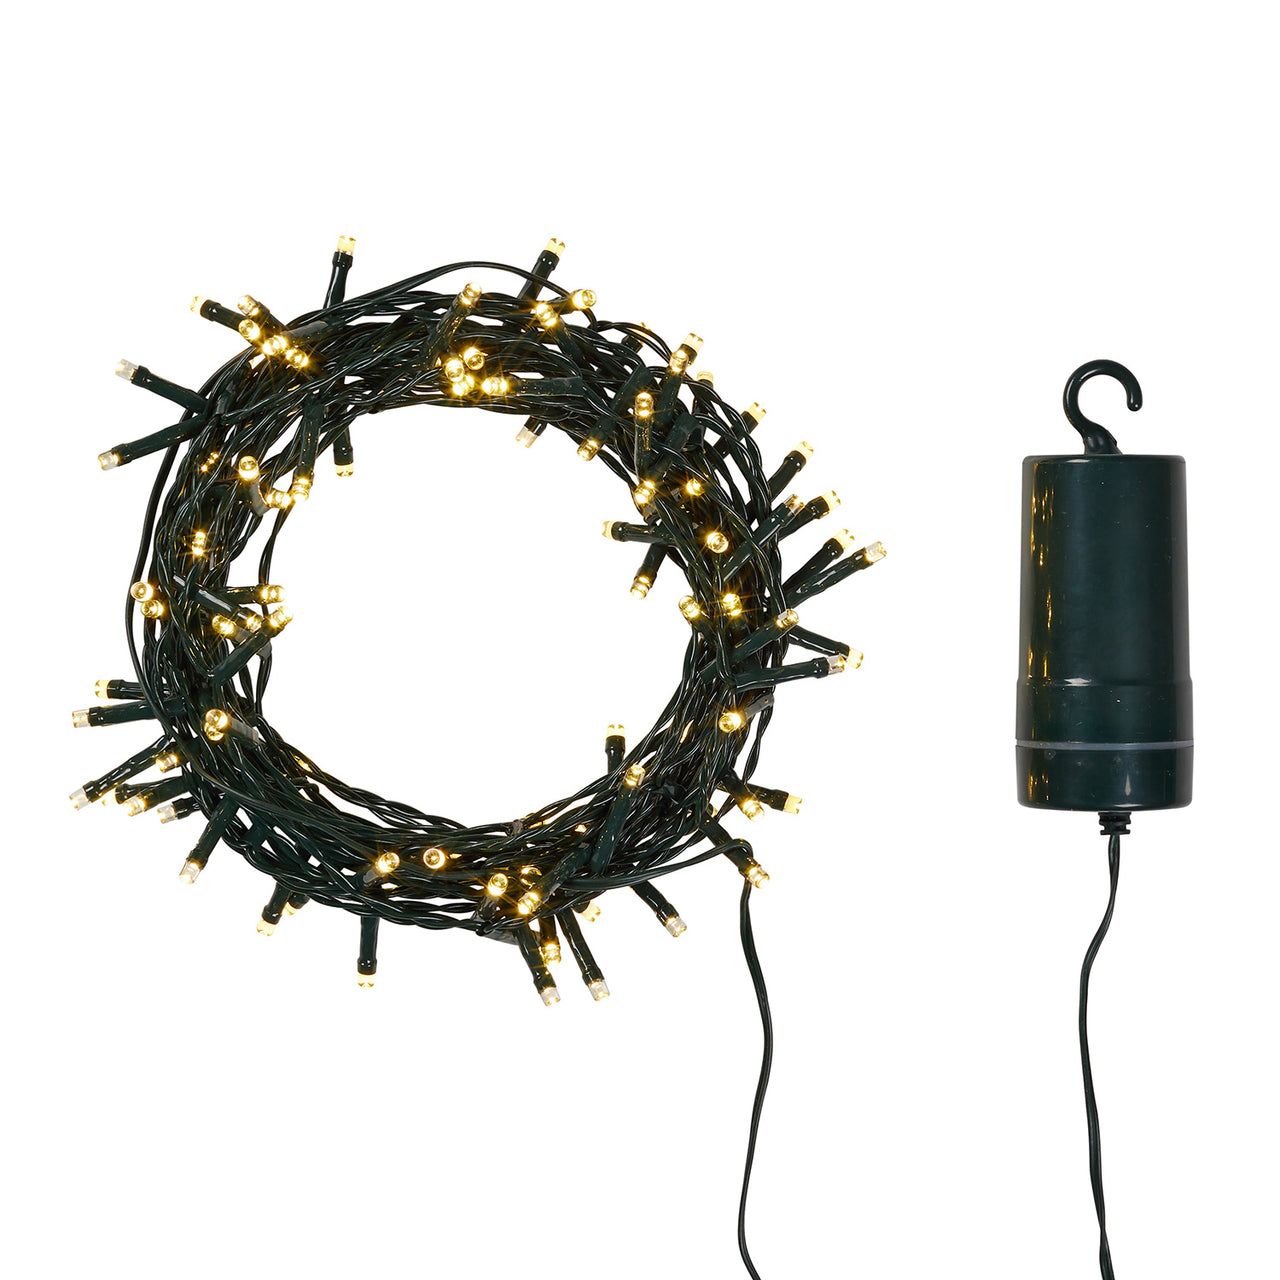 100 Warm White LED Outdoor Battery Fairy Lights On Green Cable